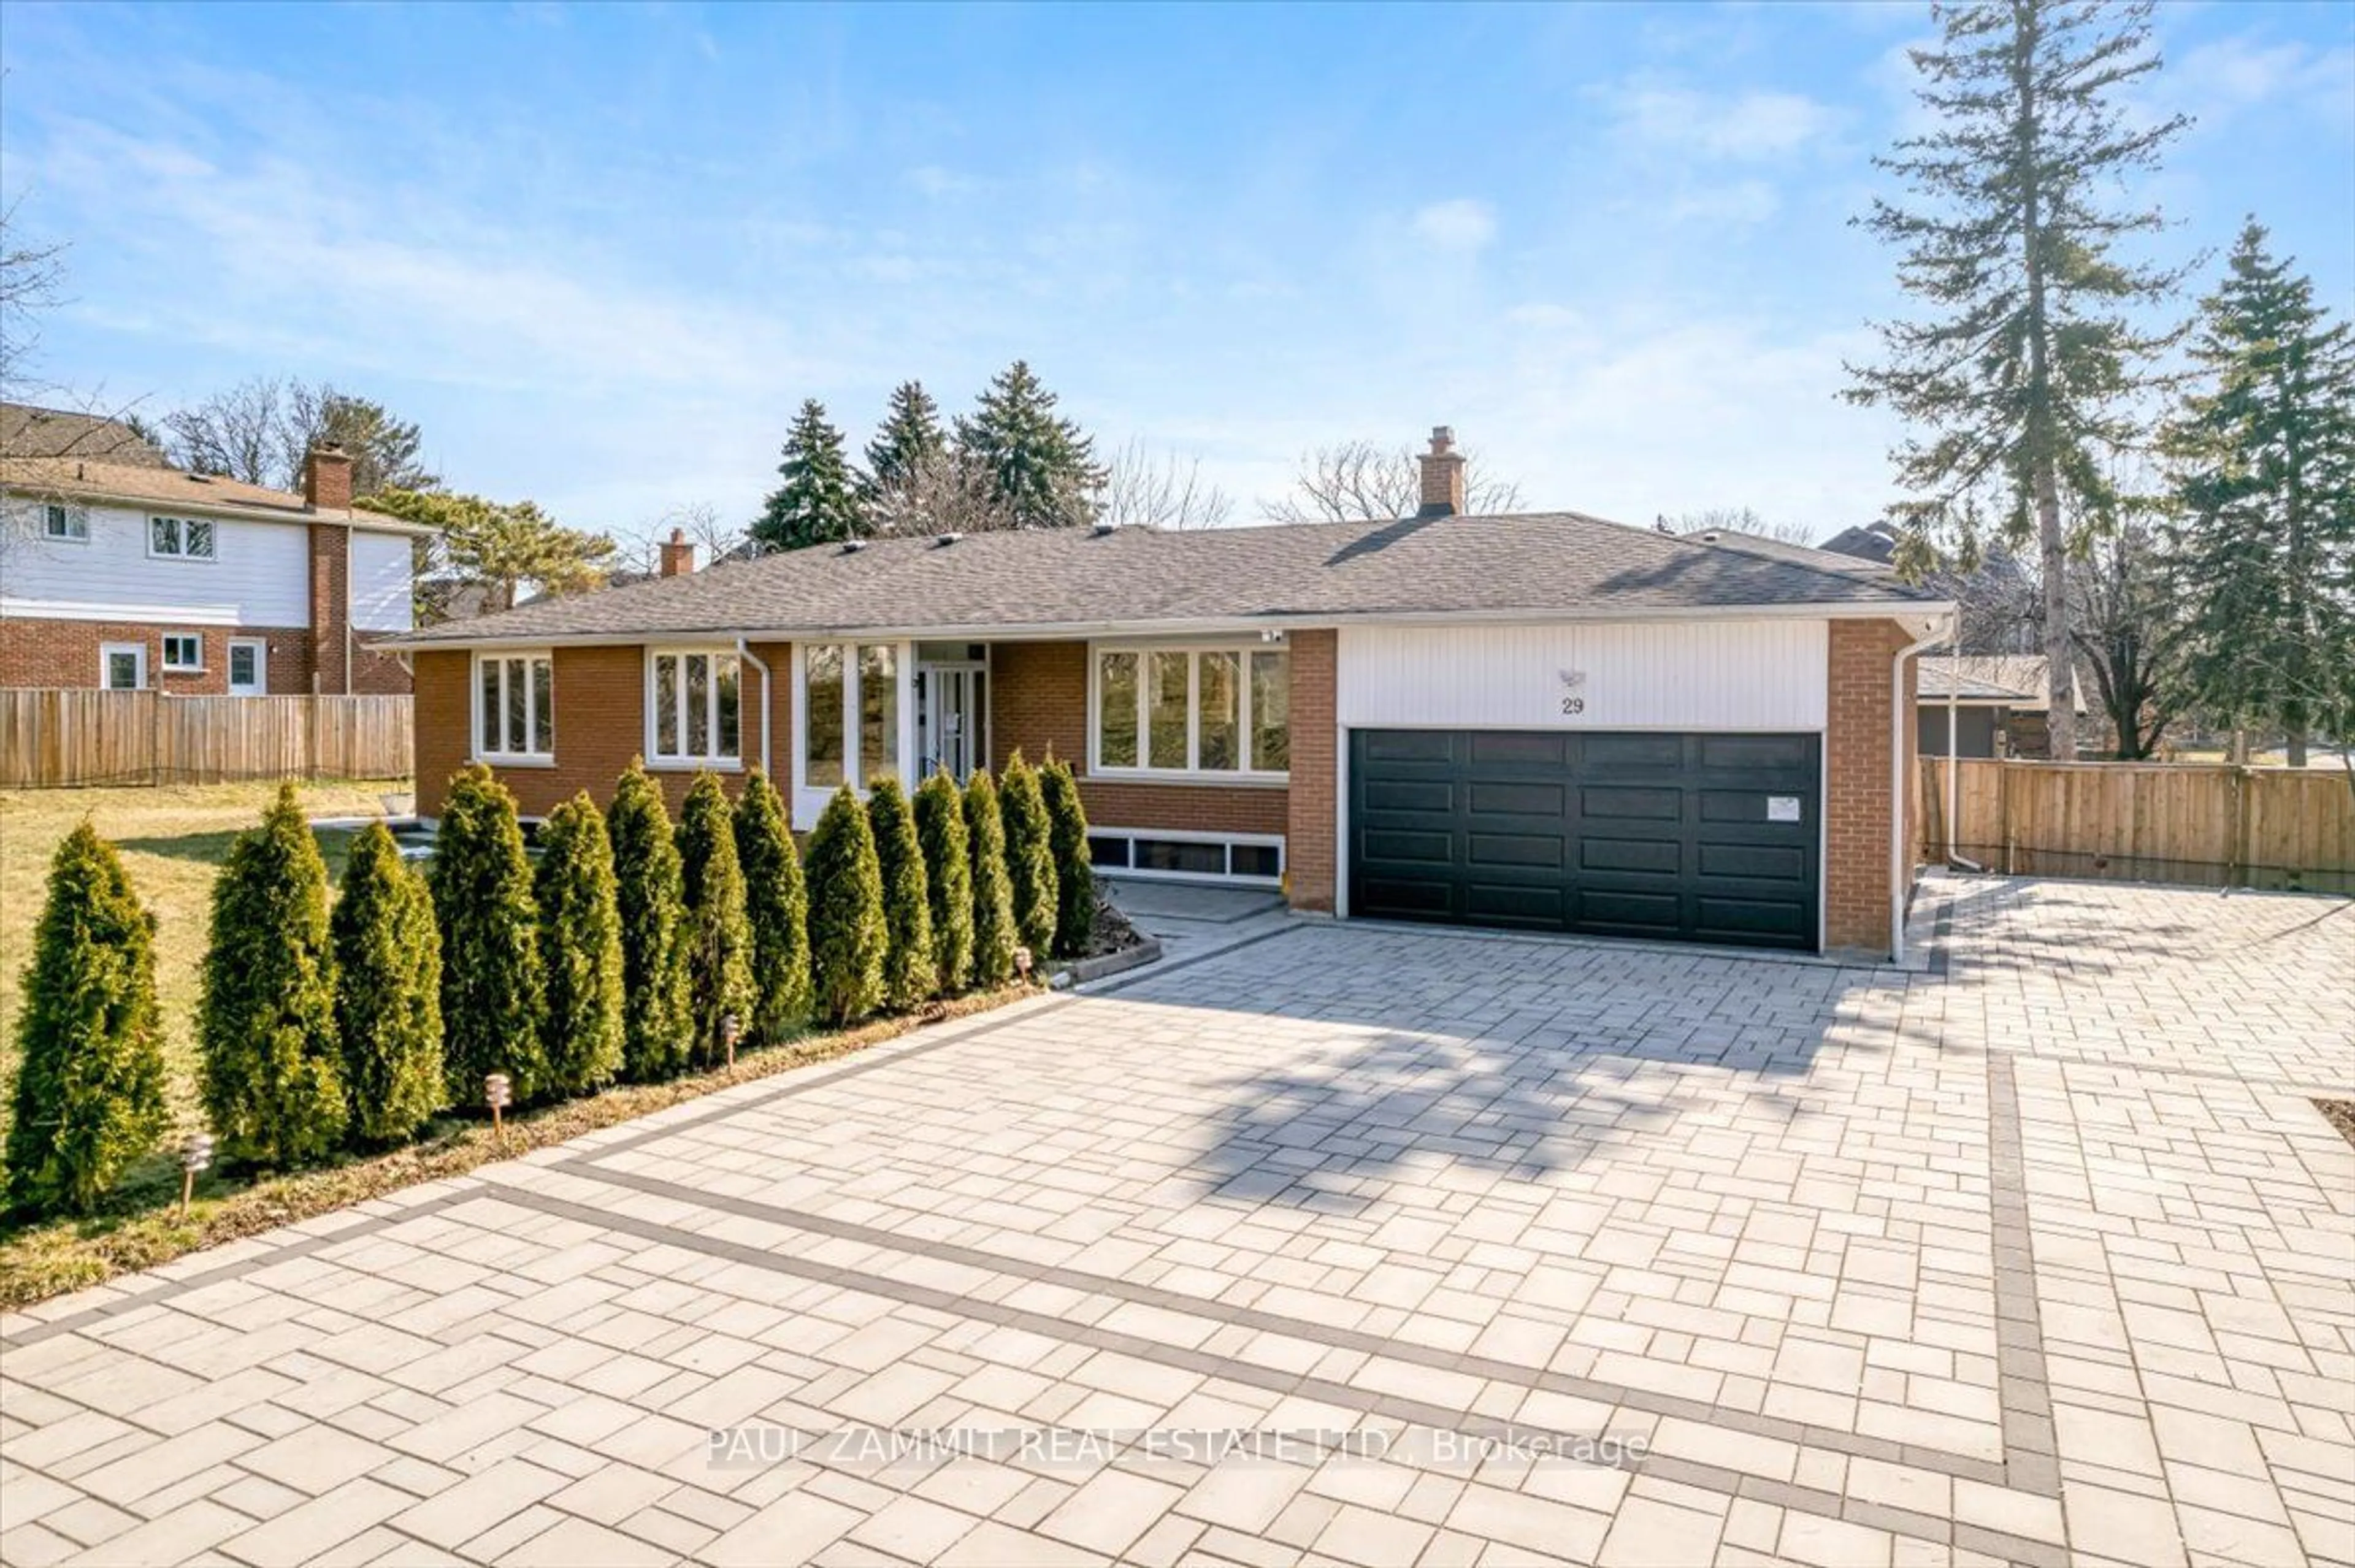 Home with brick exterior material for 29 Westwood Lane, Richmond Hill Ontario L4C 6X4